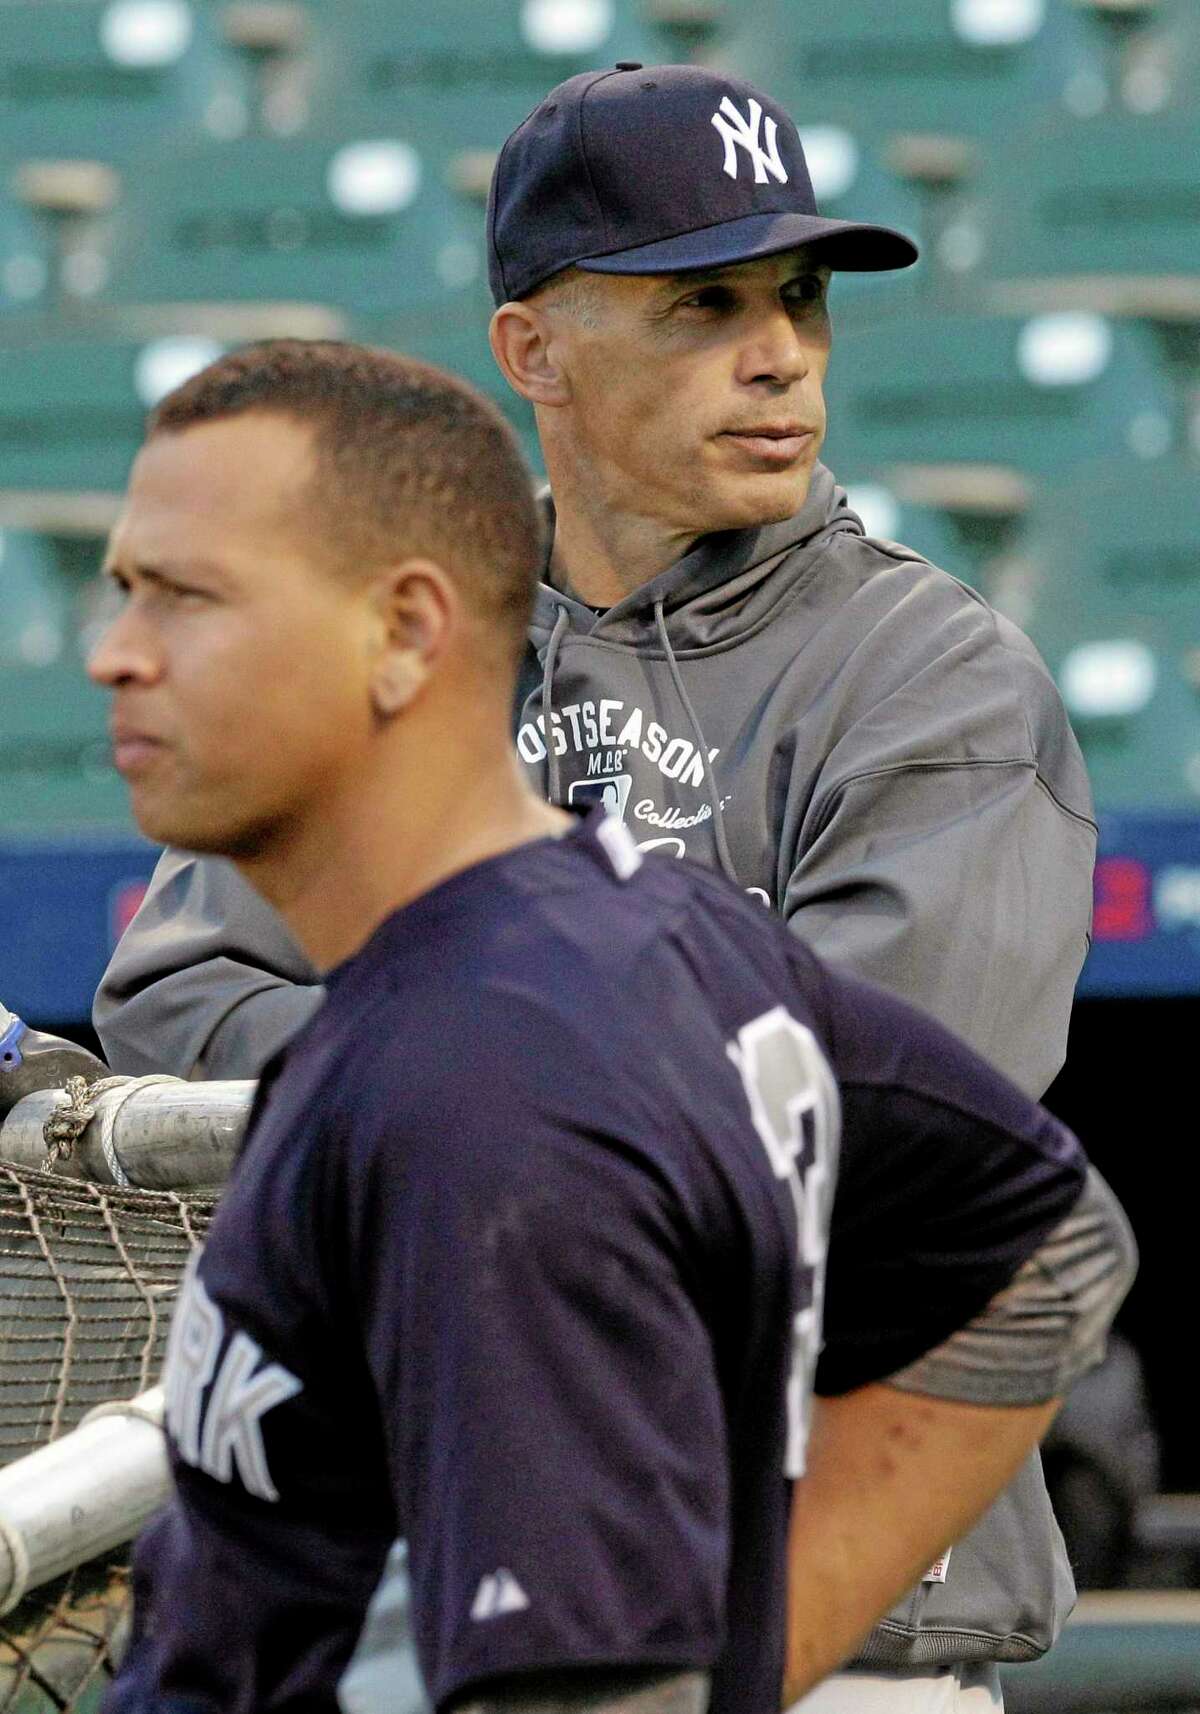 New York Yankees manager Joe Girardi, right, says the length of Alex Rodriguez’s grievance hearing complicates the team’s offseason planning. The players’ association is trying to overturn a 211-game suspension given to the third baseman last August for alleged violations of baseball’s drug program and labor contract. Girardi said Thursday that if a decision isn’t made soon, the team will have to make backup third base plans in case Rodriguez isn’t available.